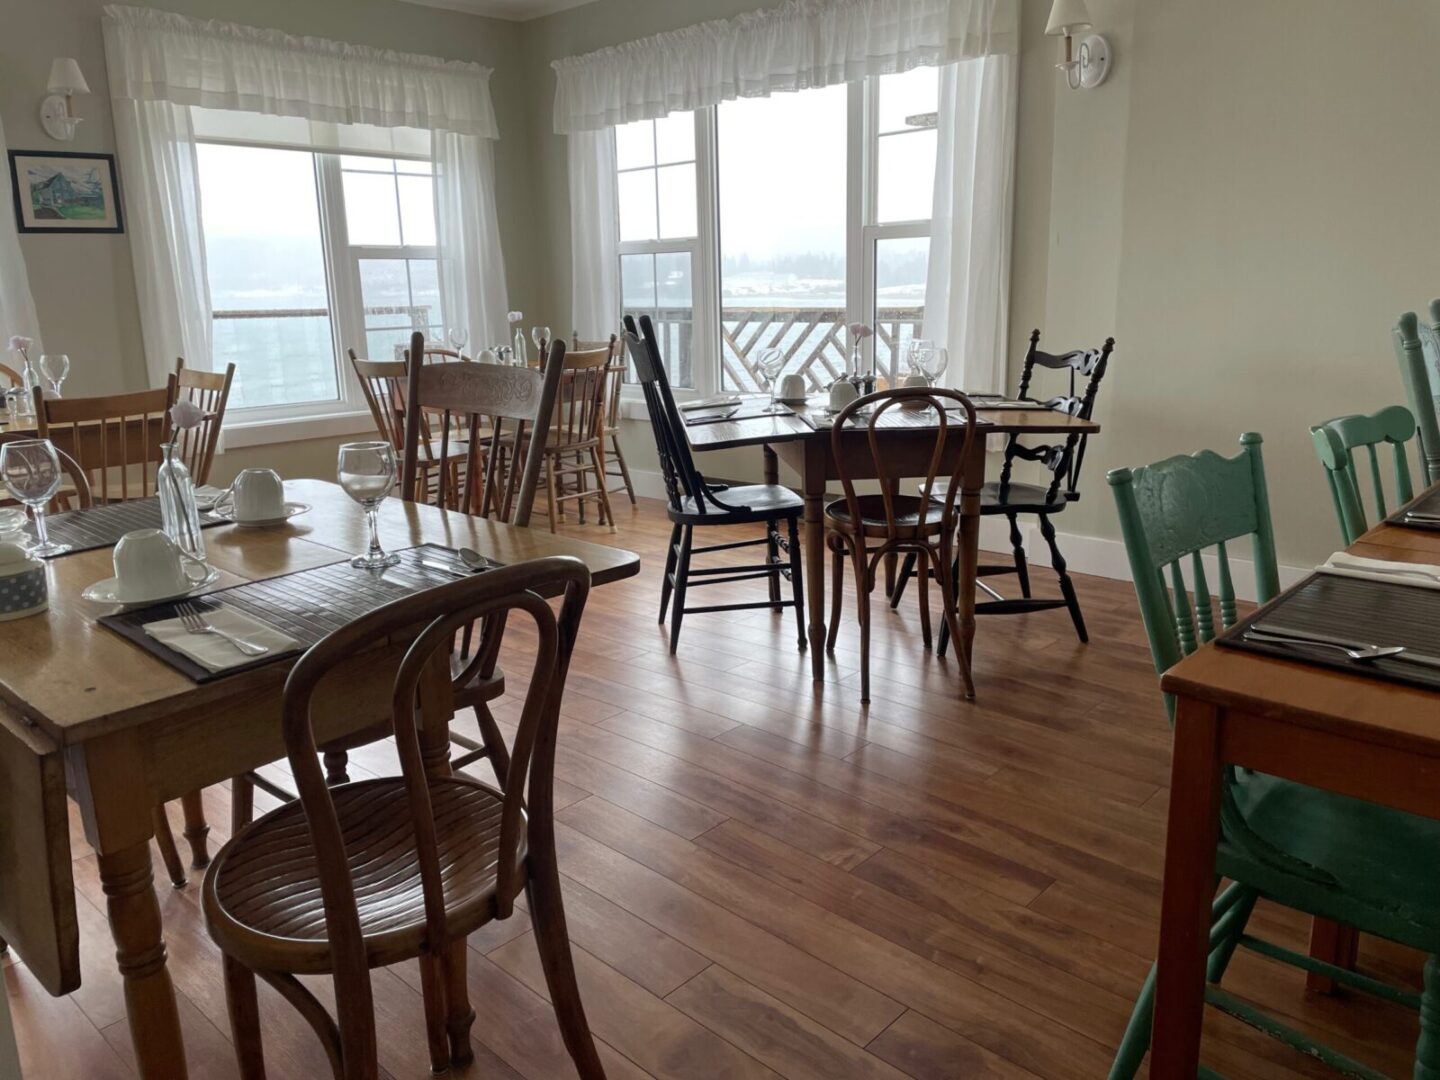 A dining room with wooden tables and chairs and a view of the ocean.